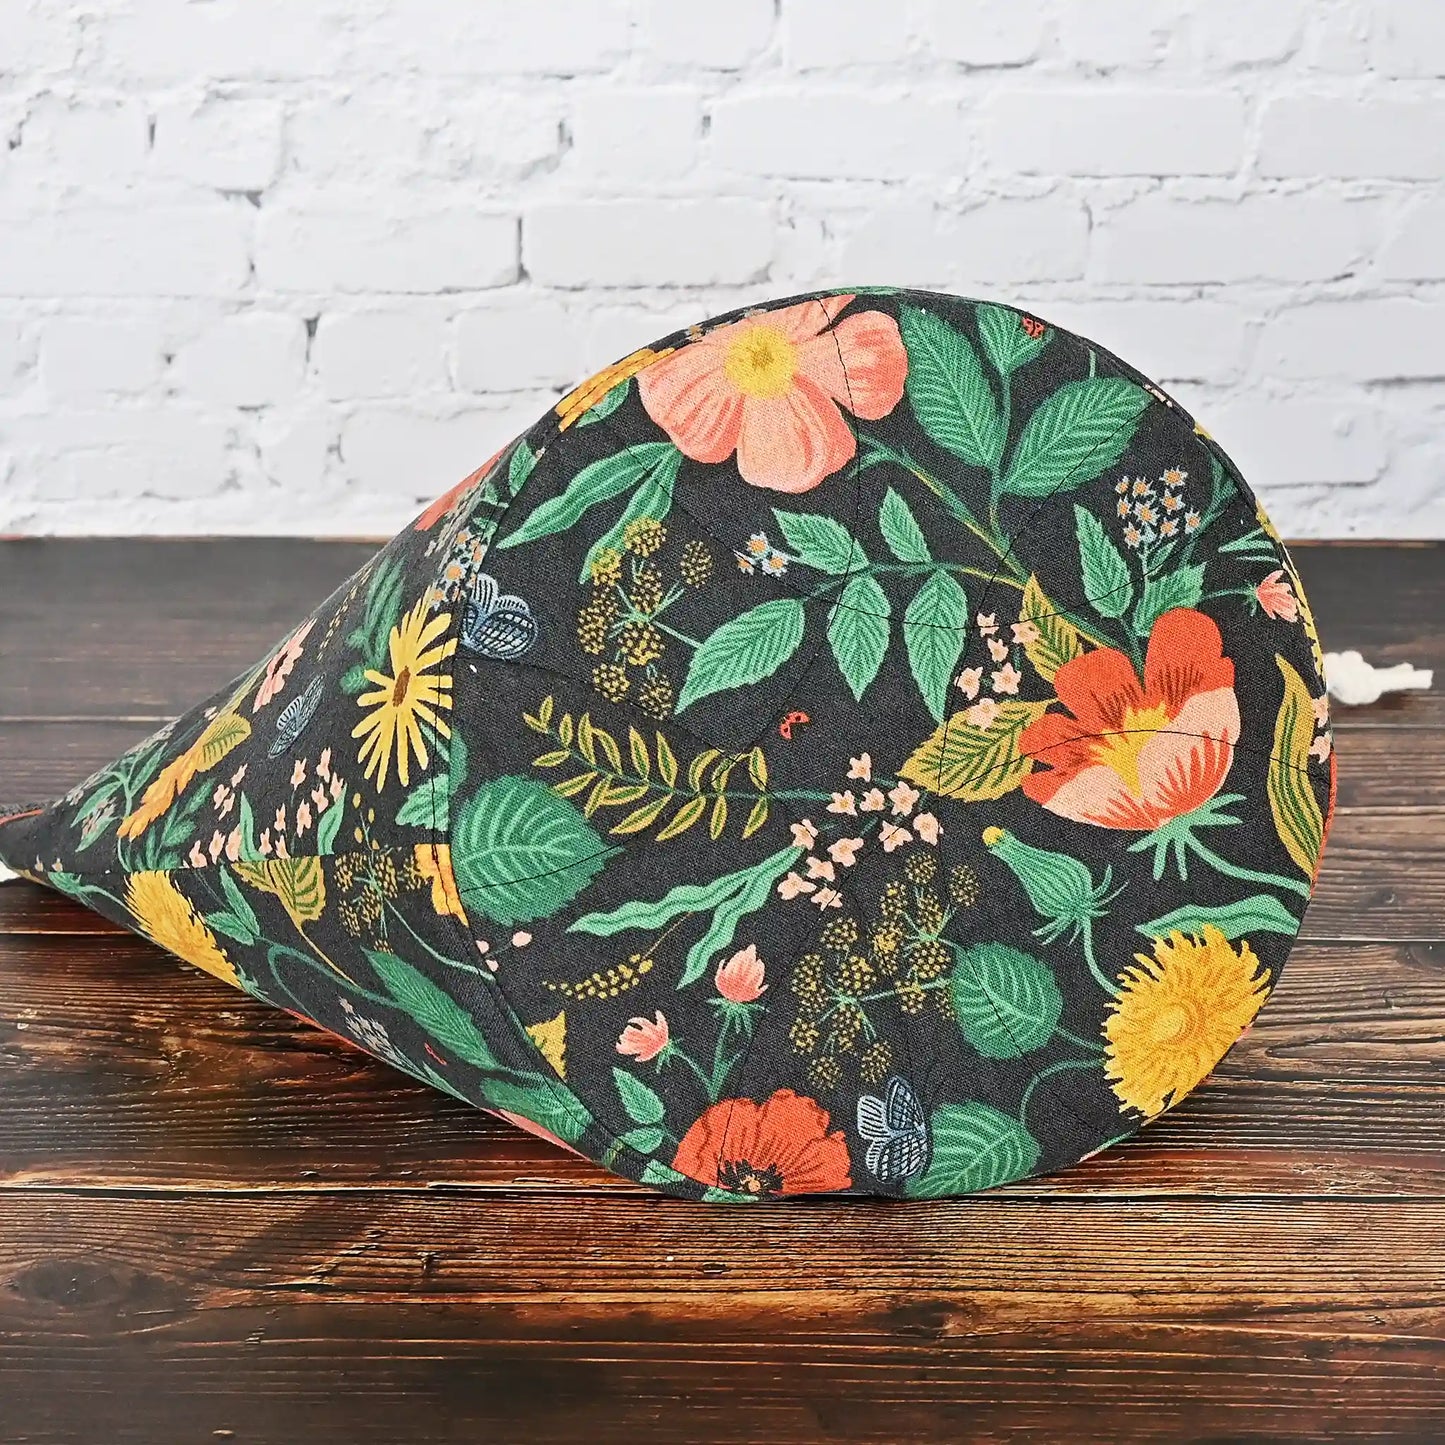 Black floral canvas bucket style project bag with pretty gold cotton interior.  Made from the Camont collection by Rifle Paper Co.  Made in Canada by Yellow Petal Handmade.